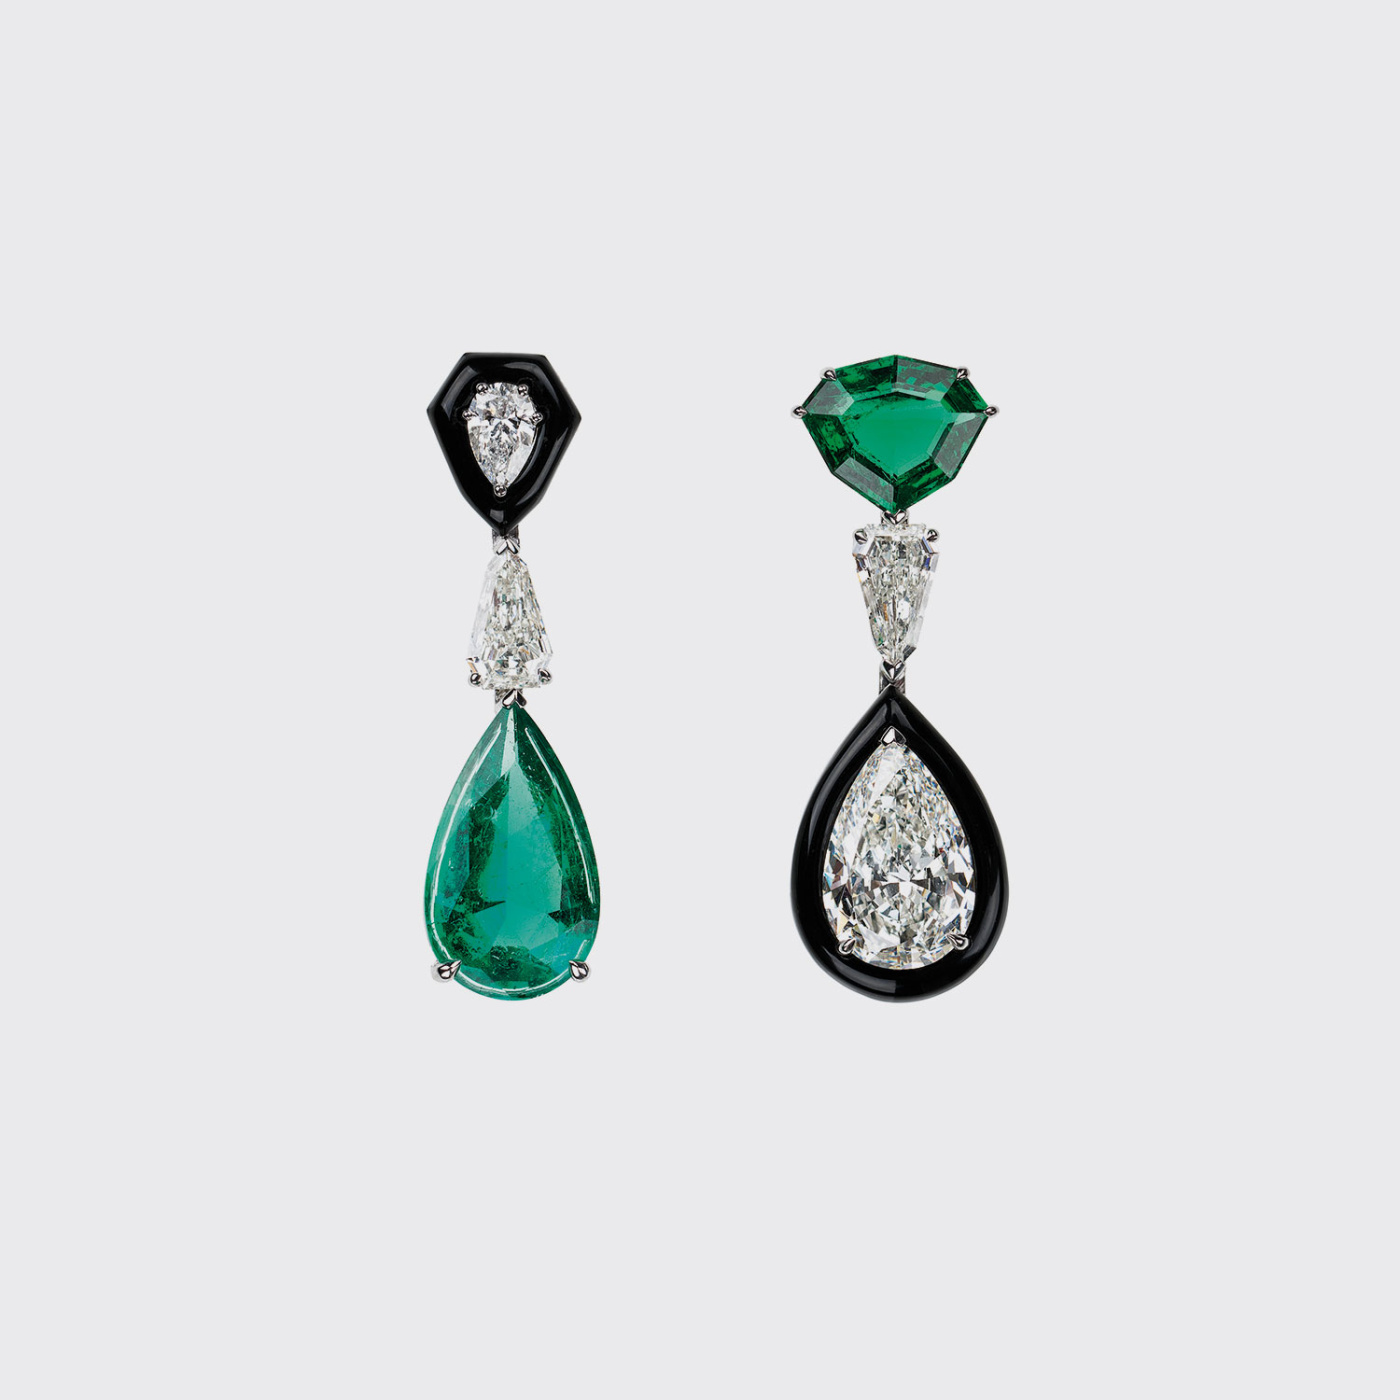 White gold mismatched earrings with emeralds and white diamonds and black enamel